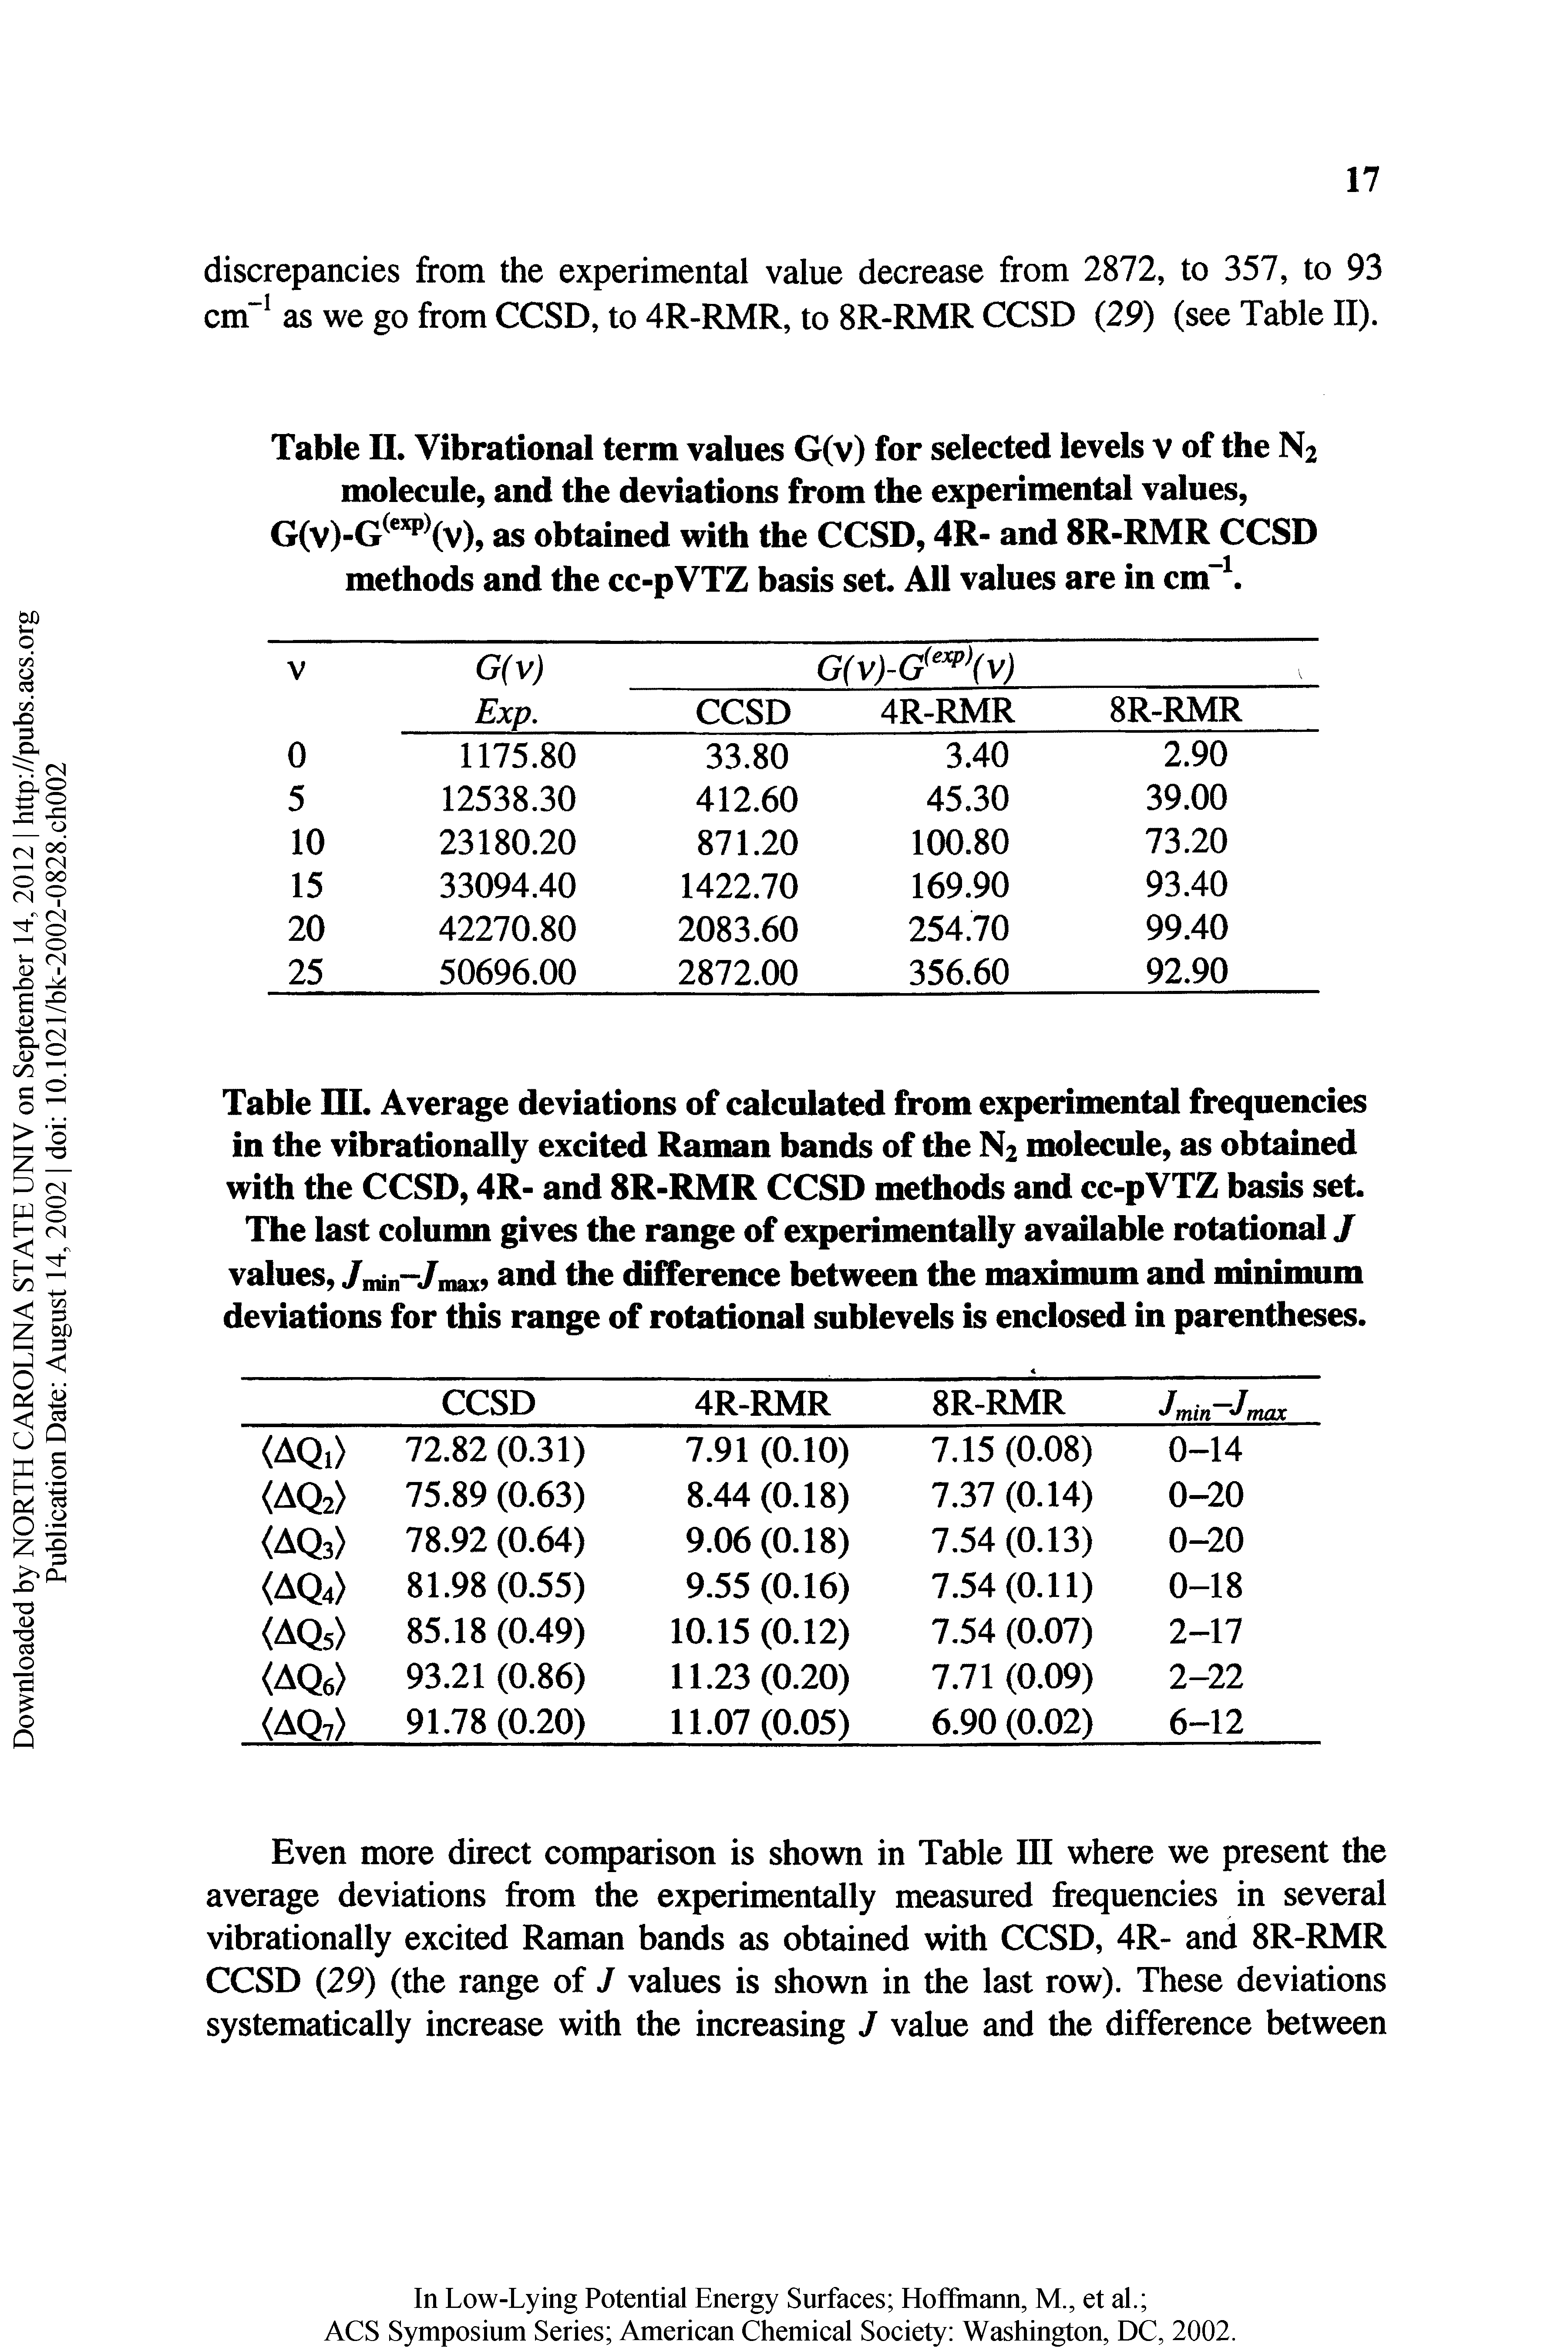 Table III. Average deviations of calculated from experimental frequencies in the vibrationally excited Rano n bands of the N2 molecule, as obtained with the CCSD, 4R- and 8R-RMR CCSD methods and cc-pVTZ basis set The last column gives the range of experimentally available rotational / values, /min /inax9 d the difference between the maximum and minimum deviations for this range of rotational sublevels is enclosed in parentheses.